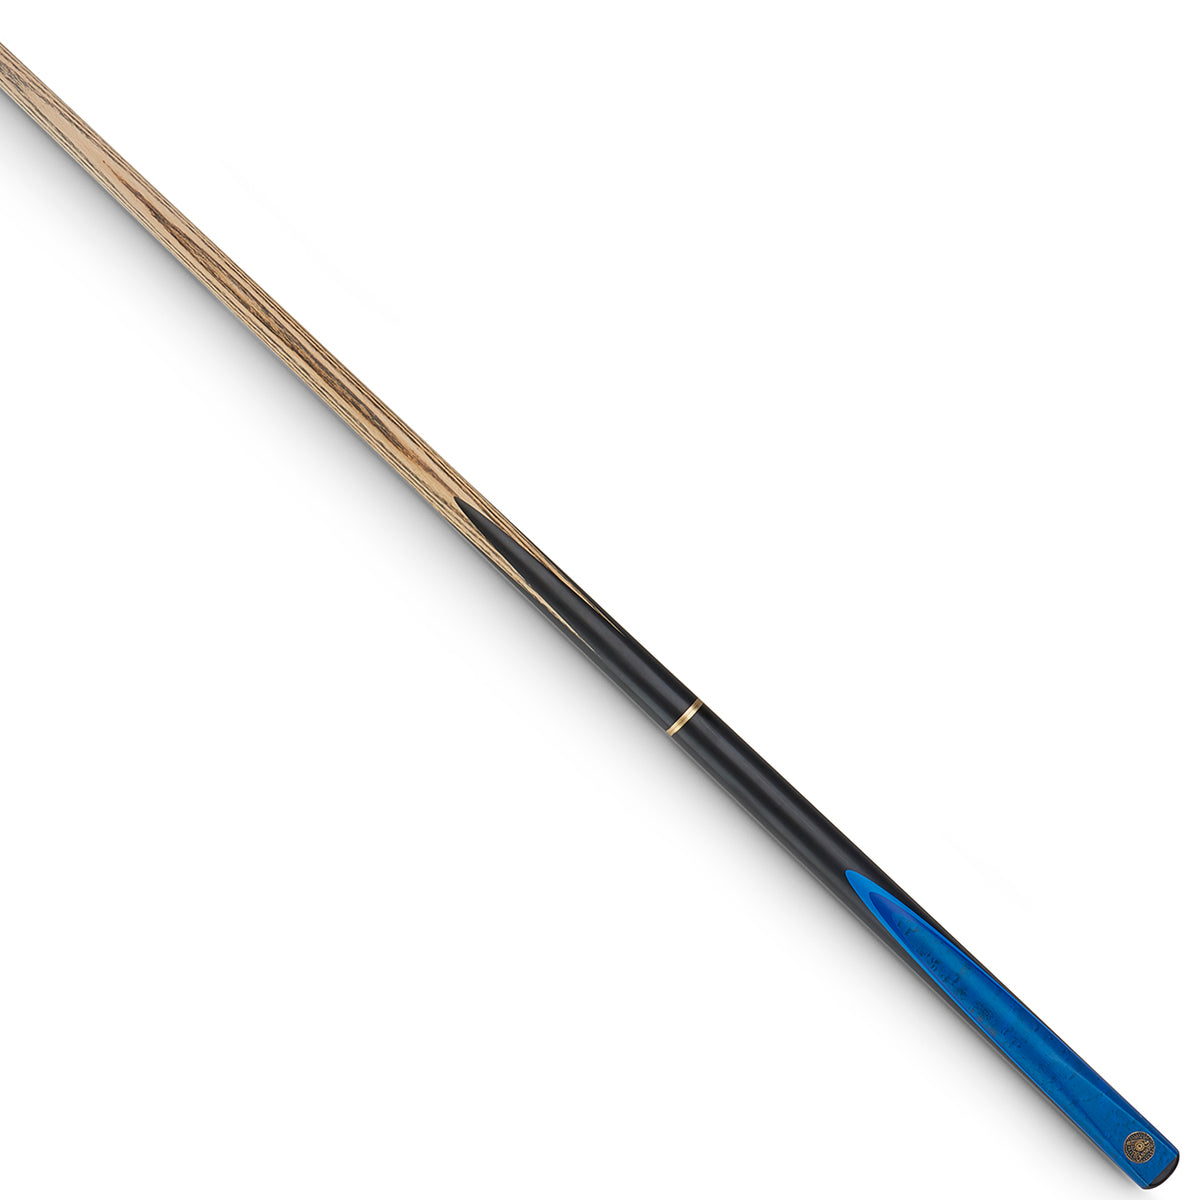 Cannon Swift 3/4 Jointed Snooker Cue. On angle view